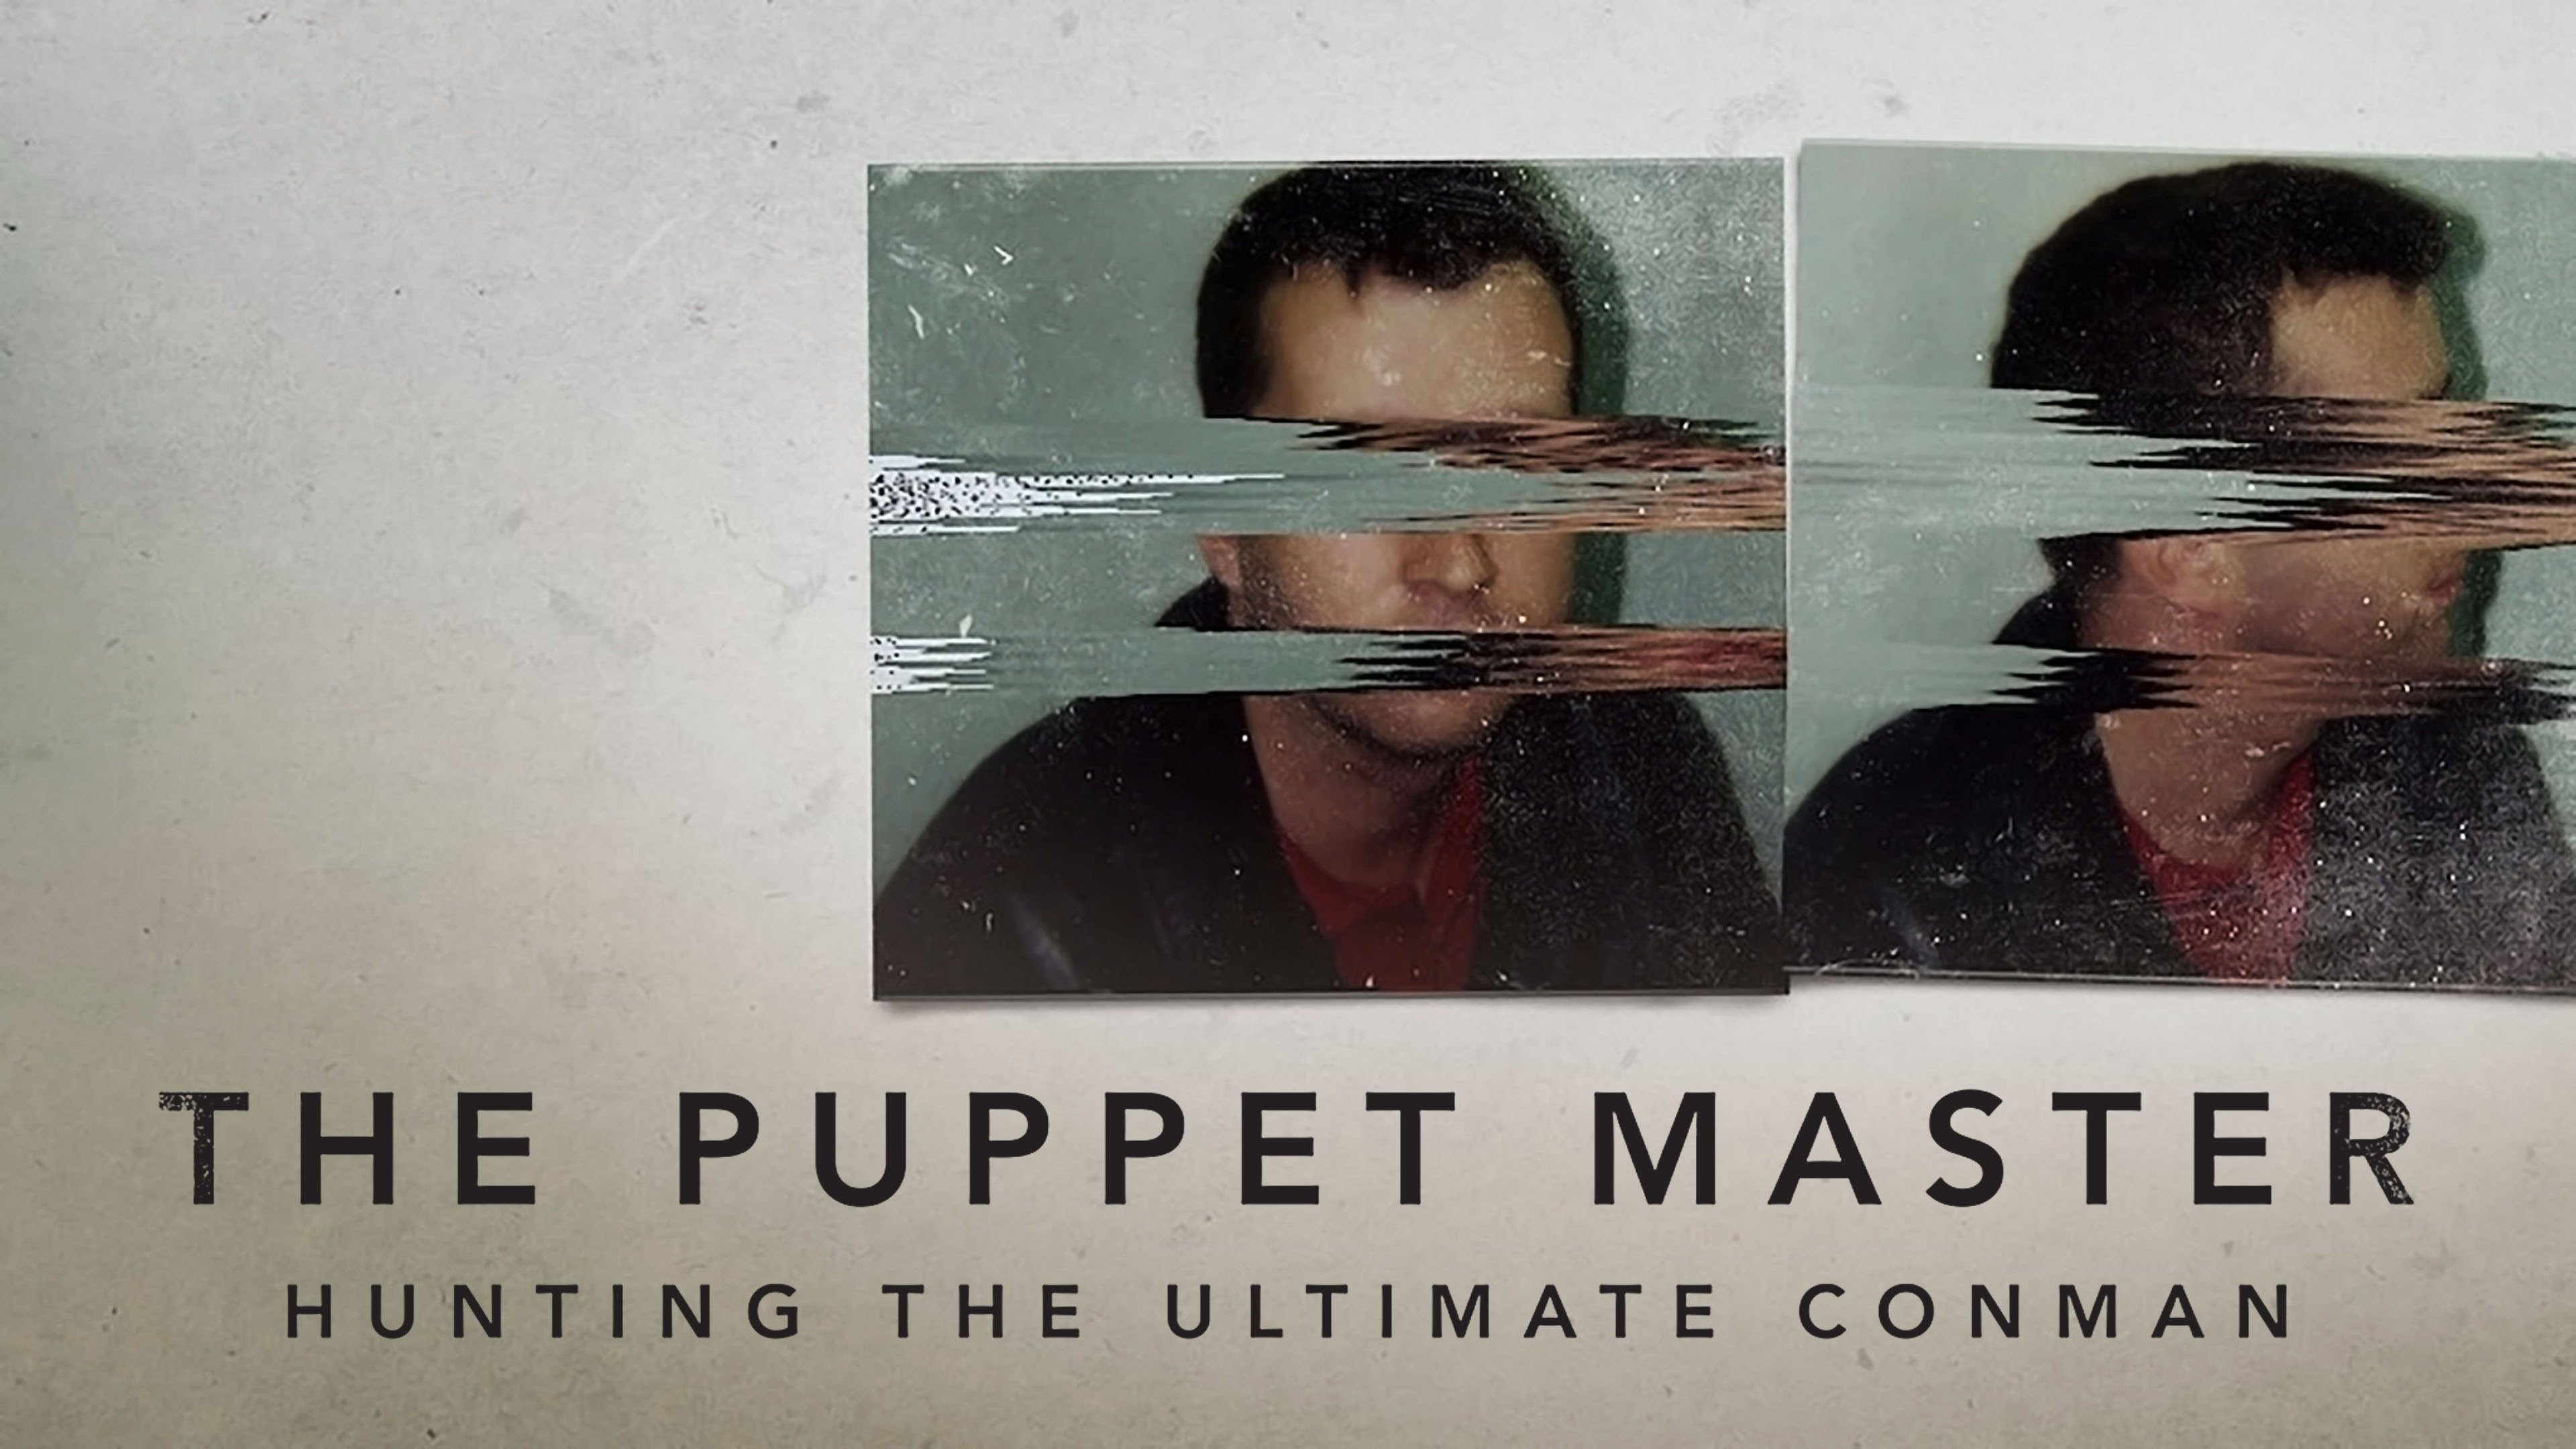 The Puppet Master: Hunting the Ultimate Conman Cast, News, Videos and more